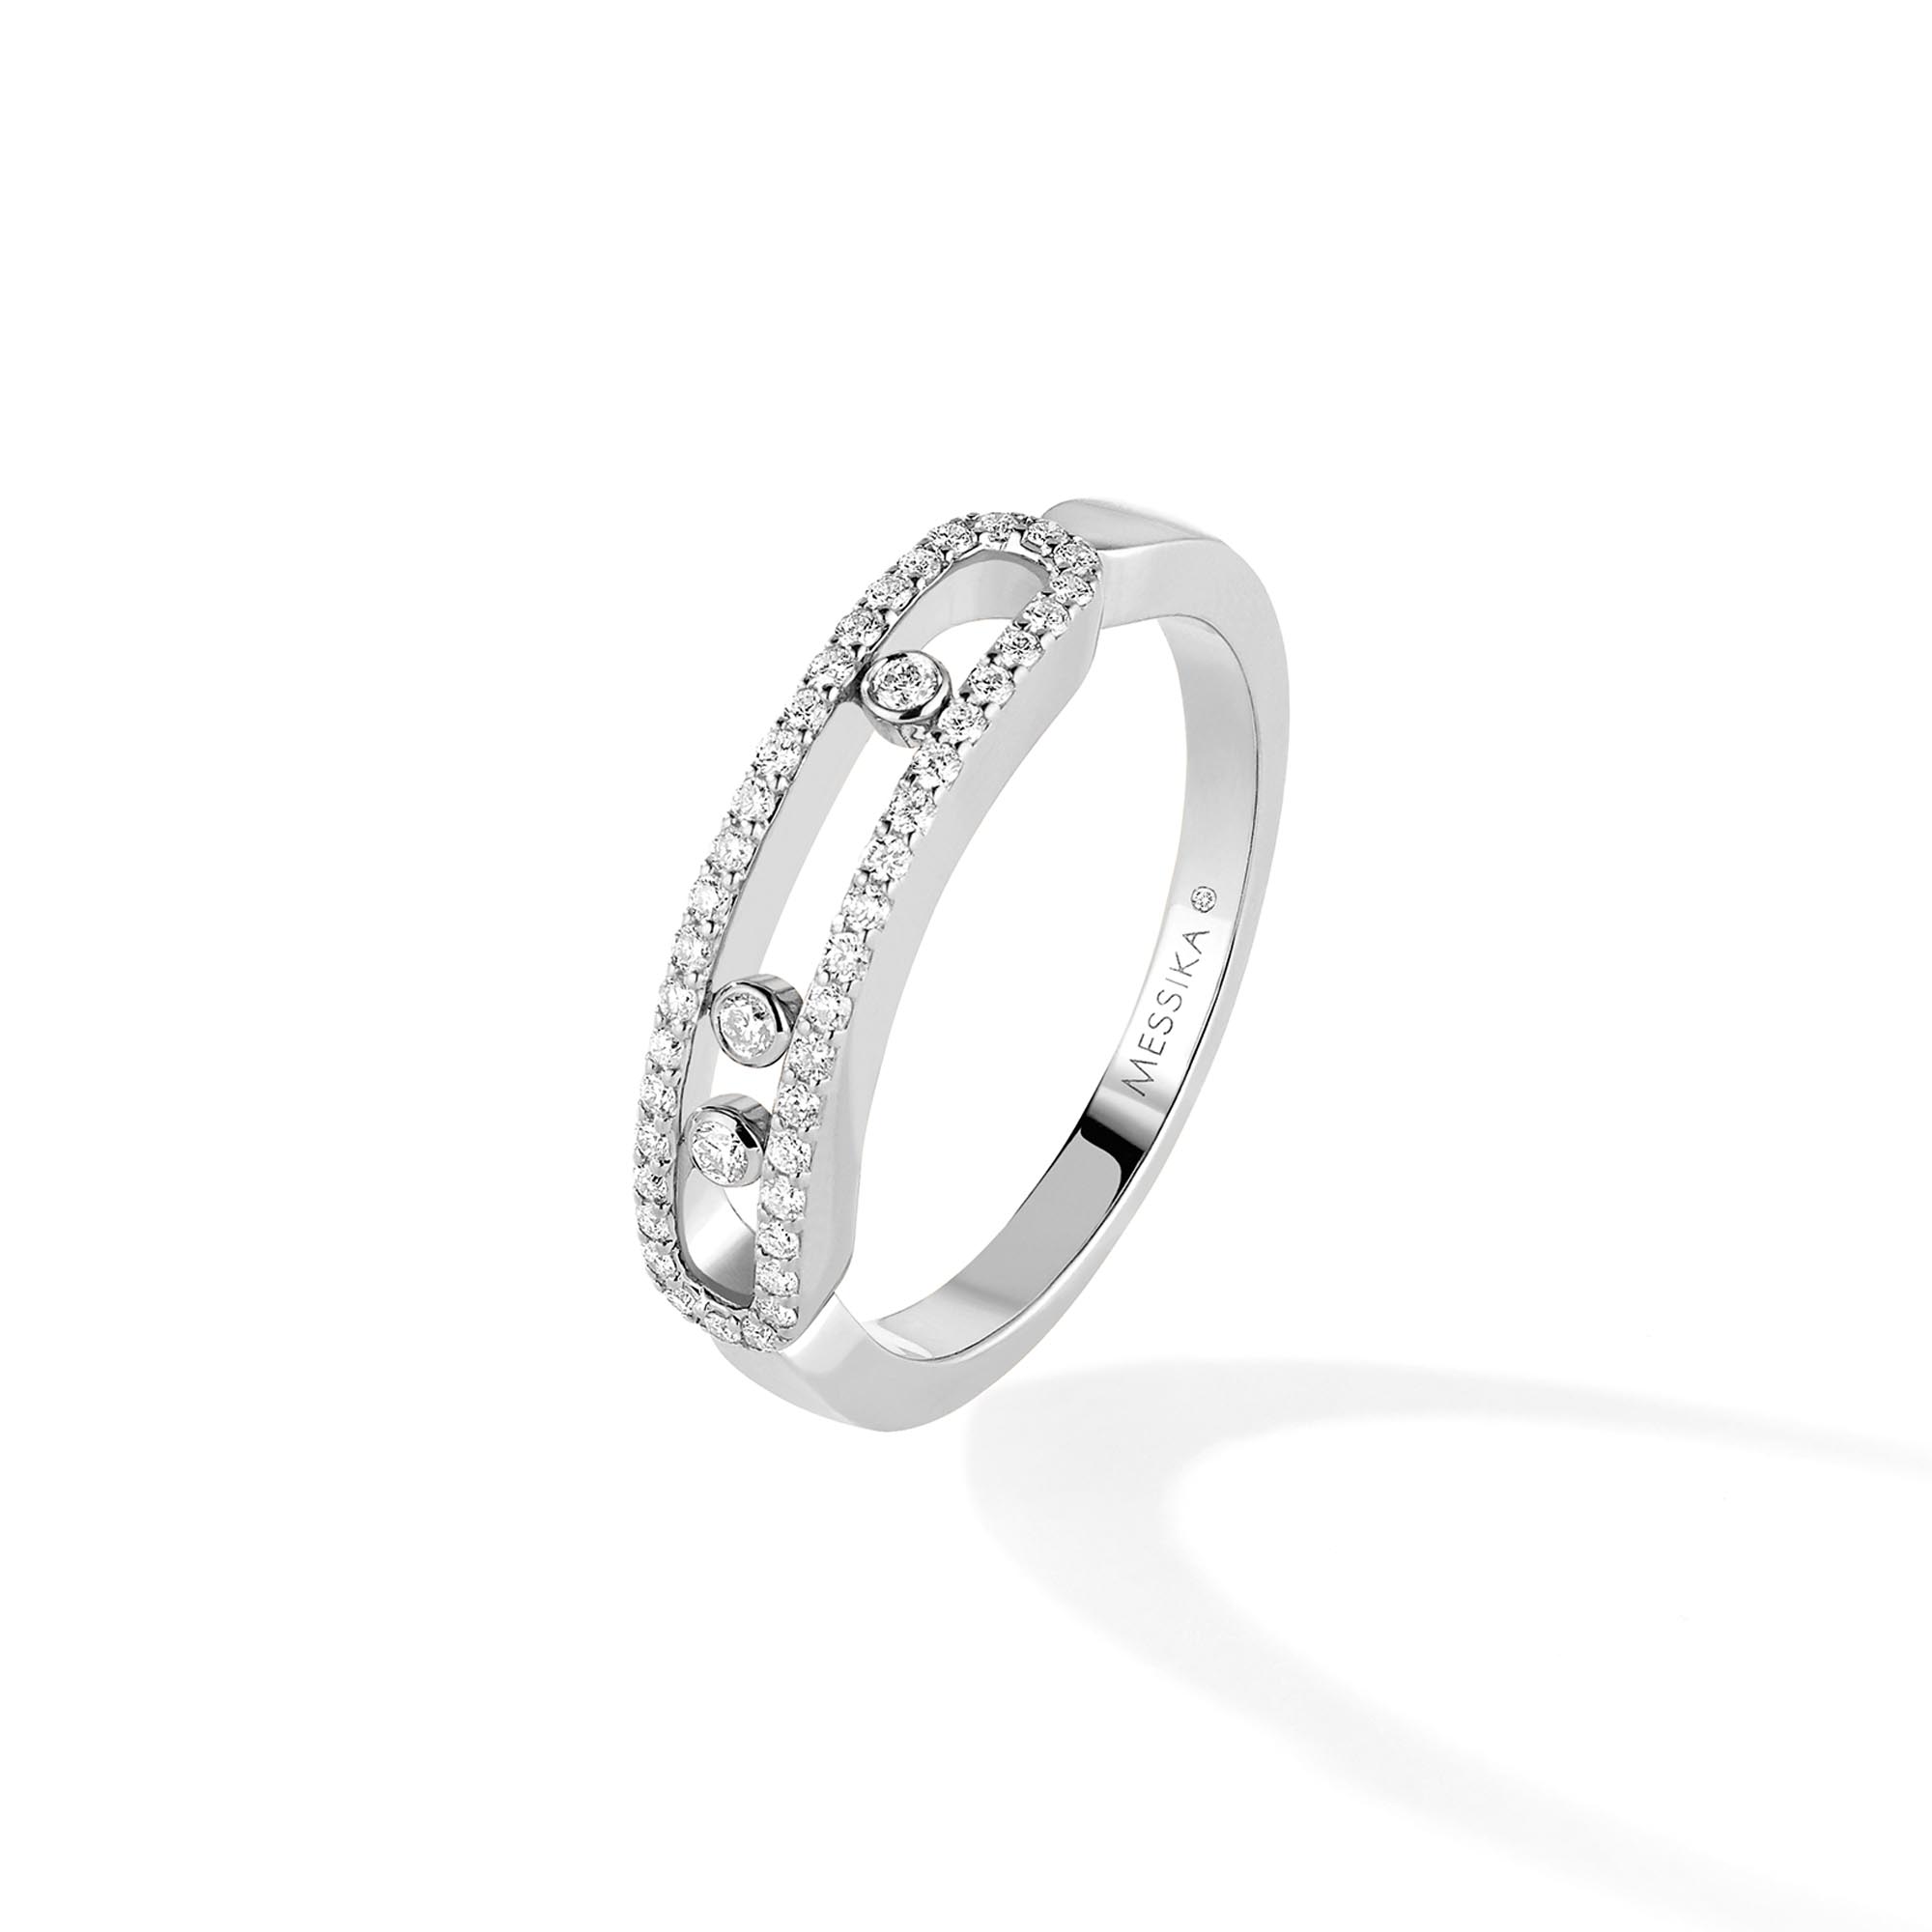 Messika Baby Move Classique Pavé Ring (Ref: 04683-WG)